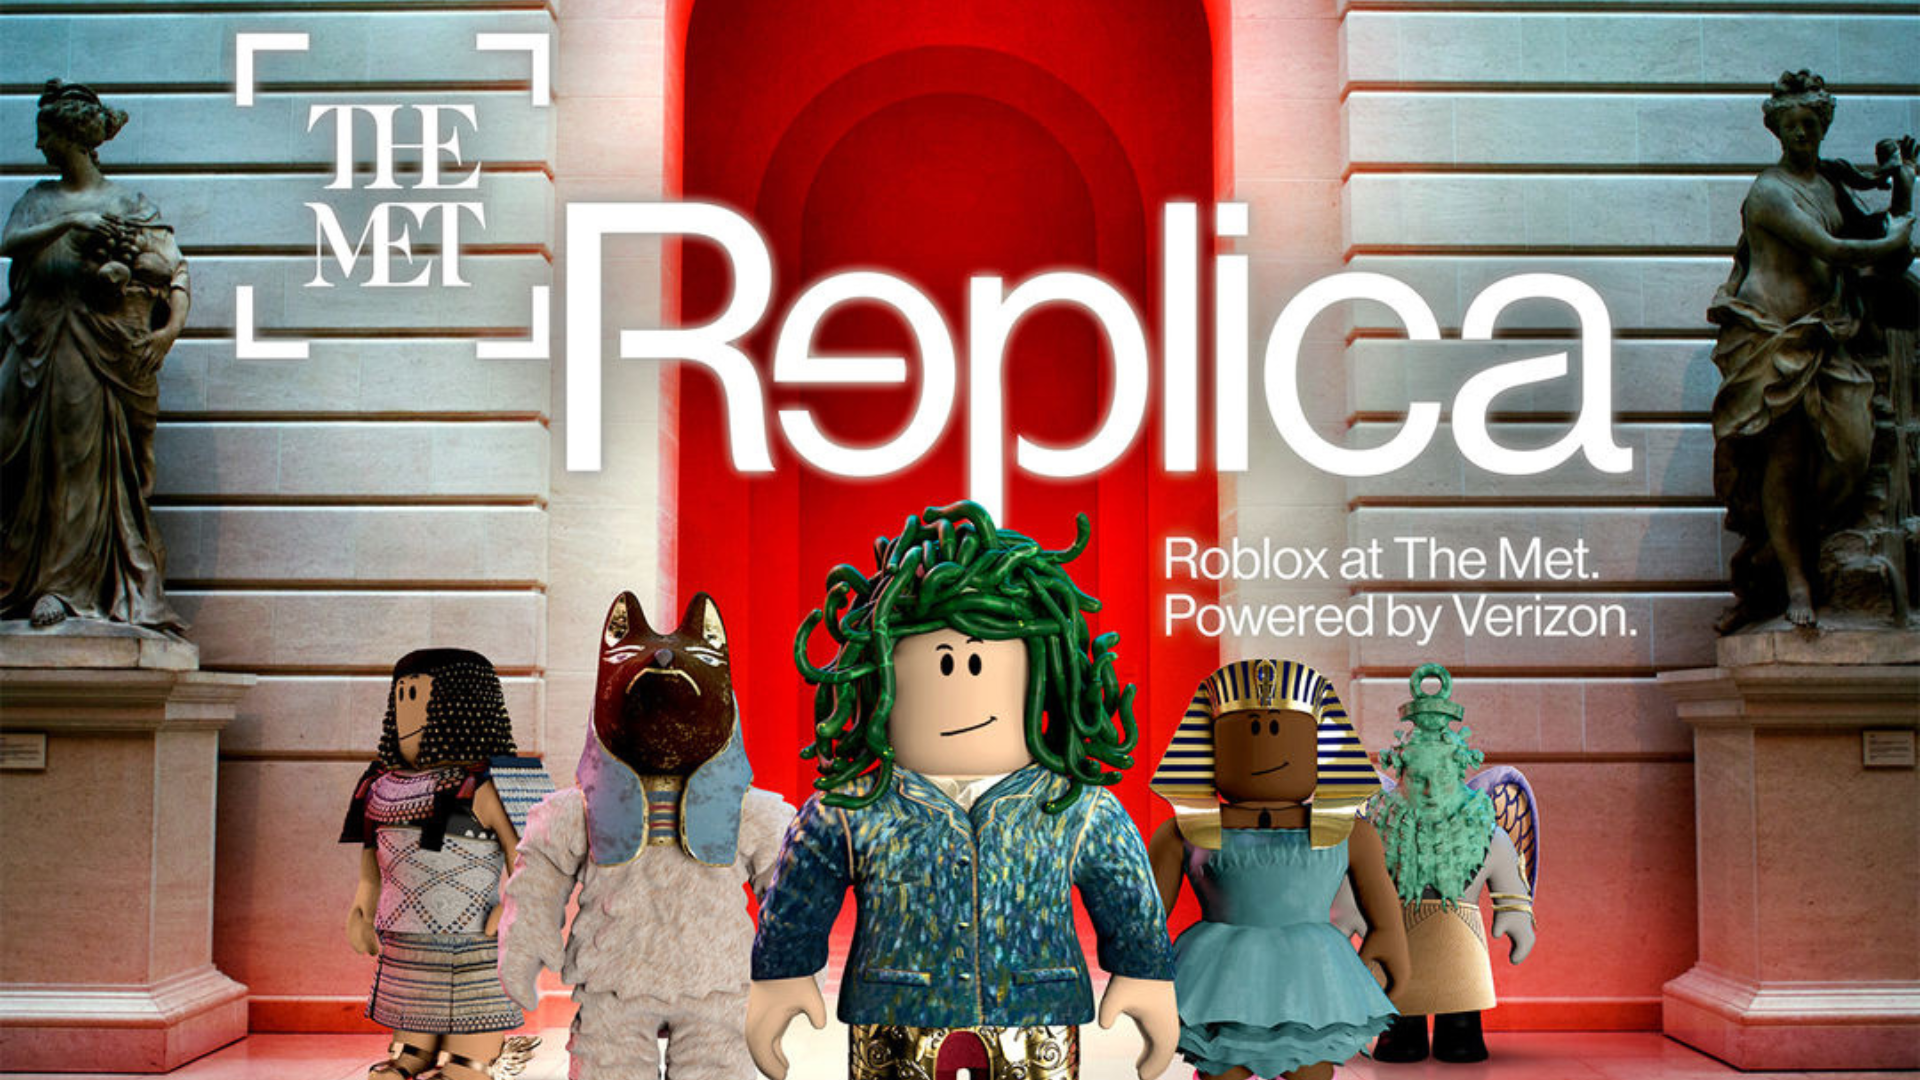 Personnages Roblox au Met Museum 